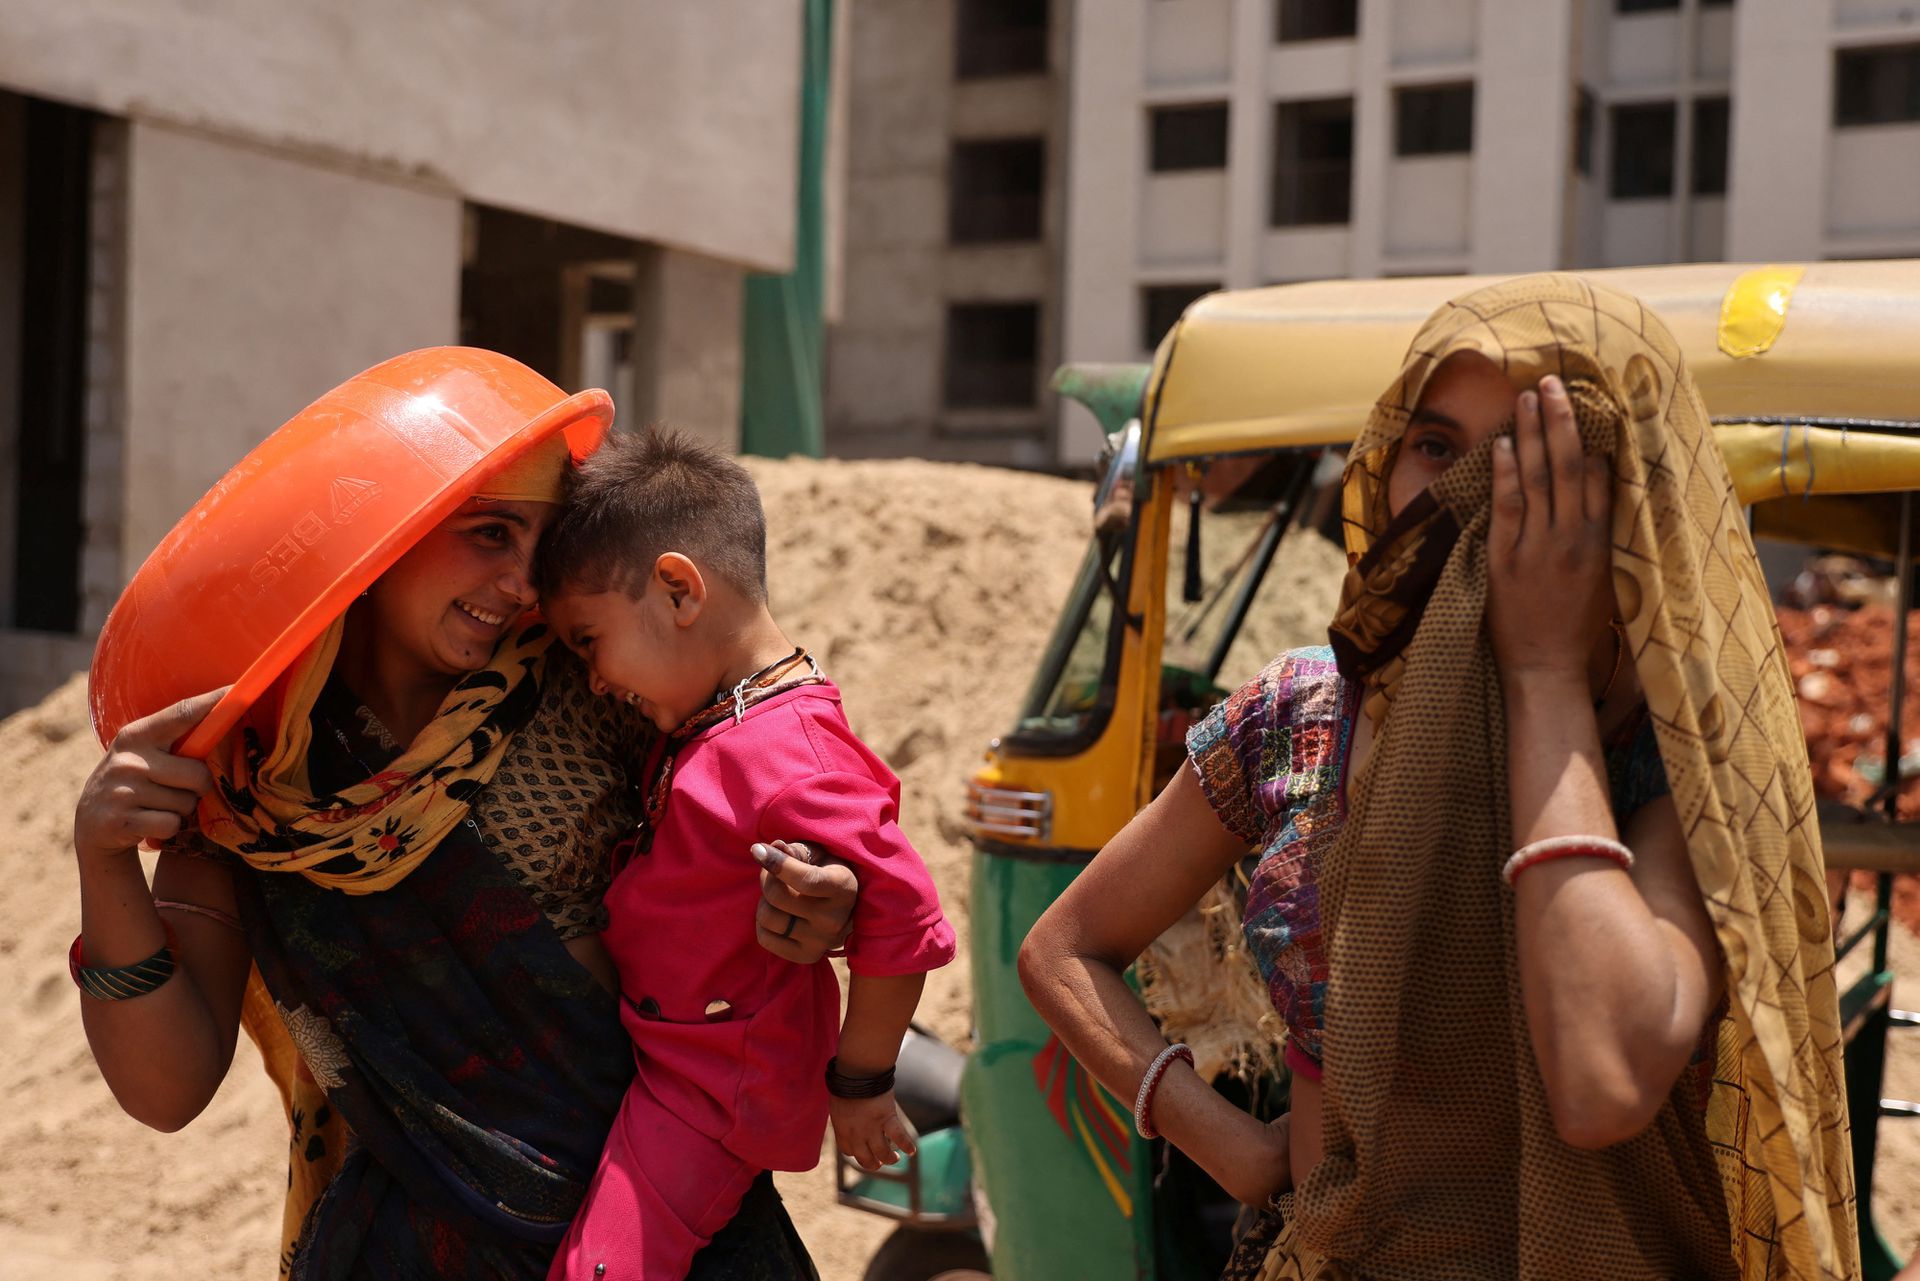 Women take shelter from the sun at a construction site in Ahmedabad, India, April 28, 2023. Photo: Reuters